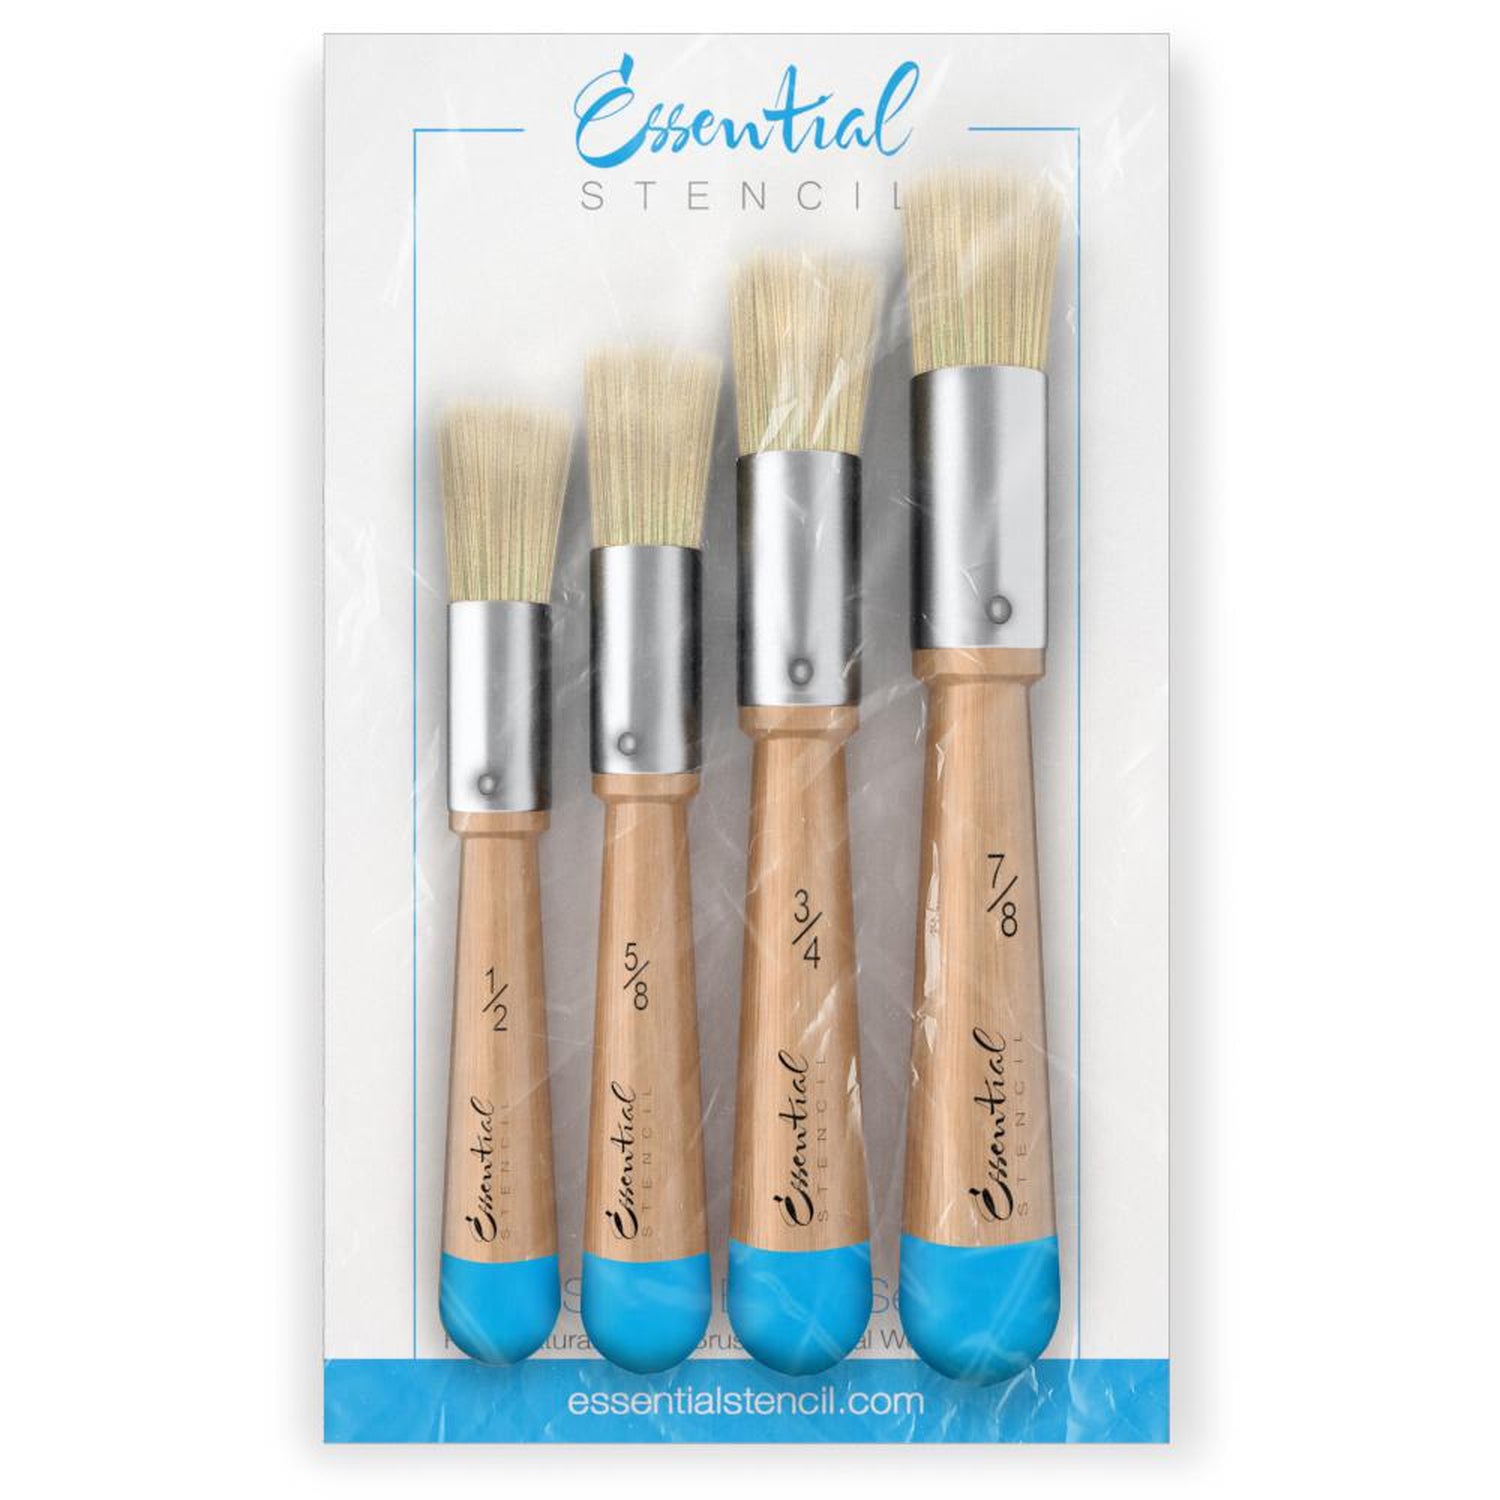 Stenciling brush, stencil supplies, large selection of decorative